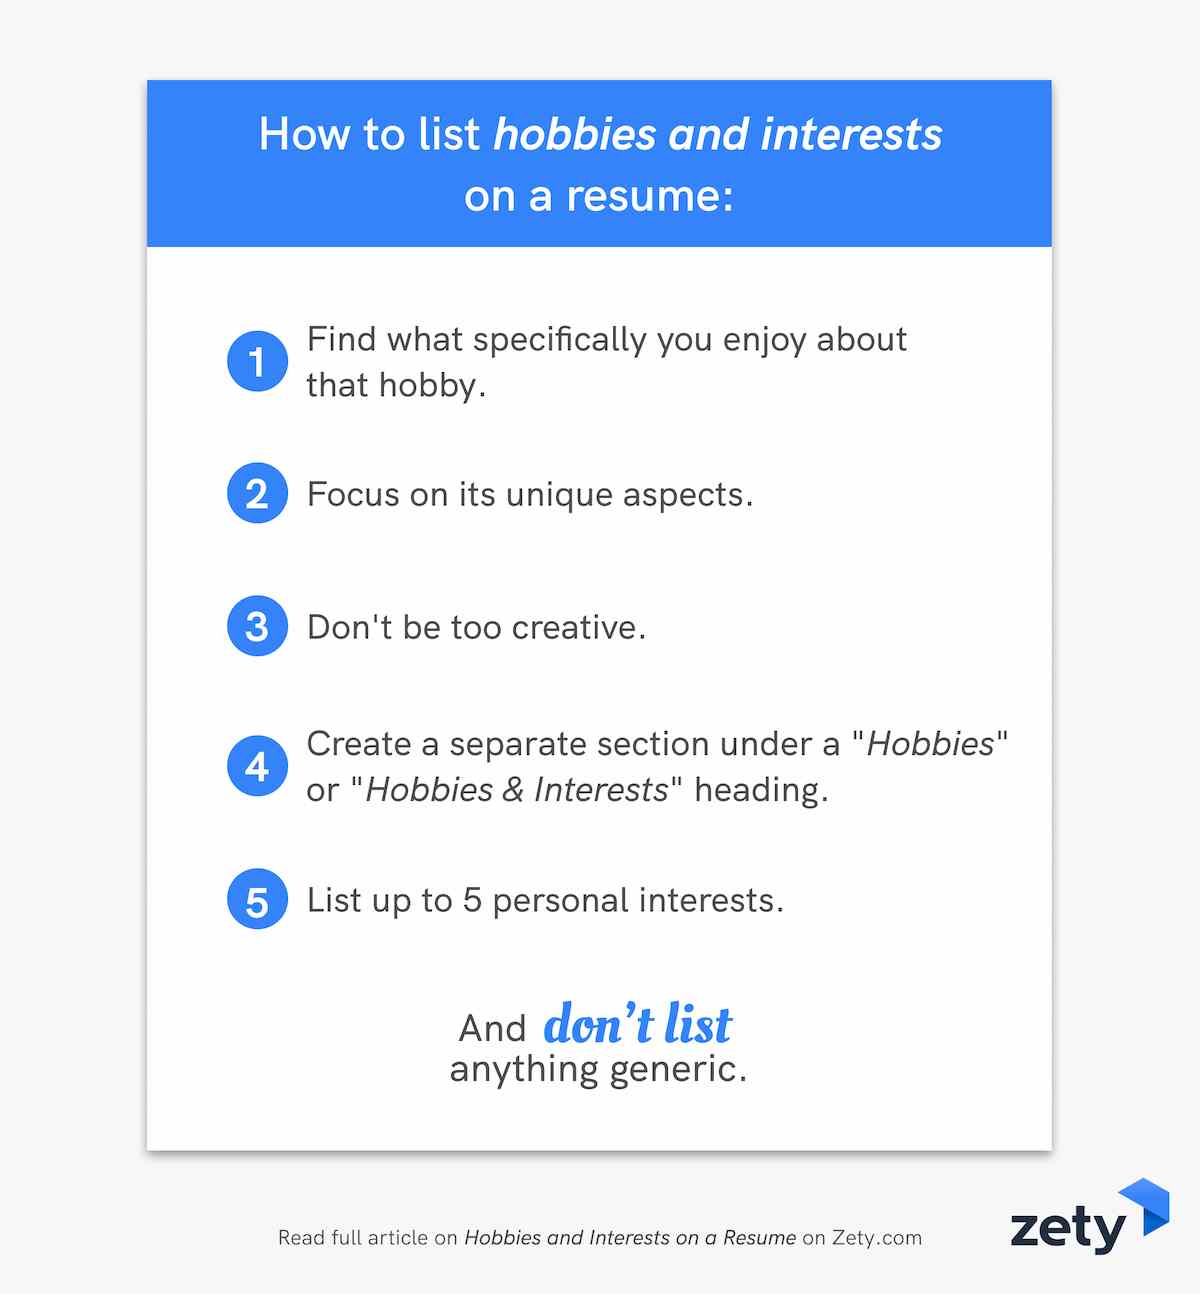 How to list hobbies and interests on a resume